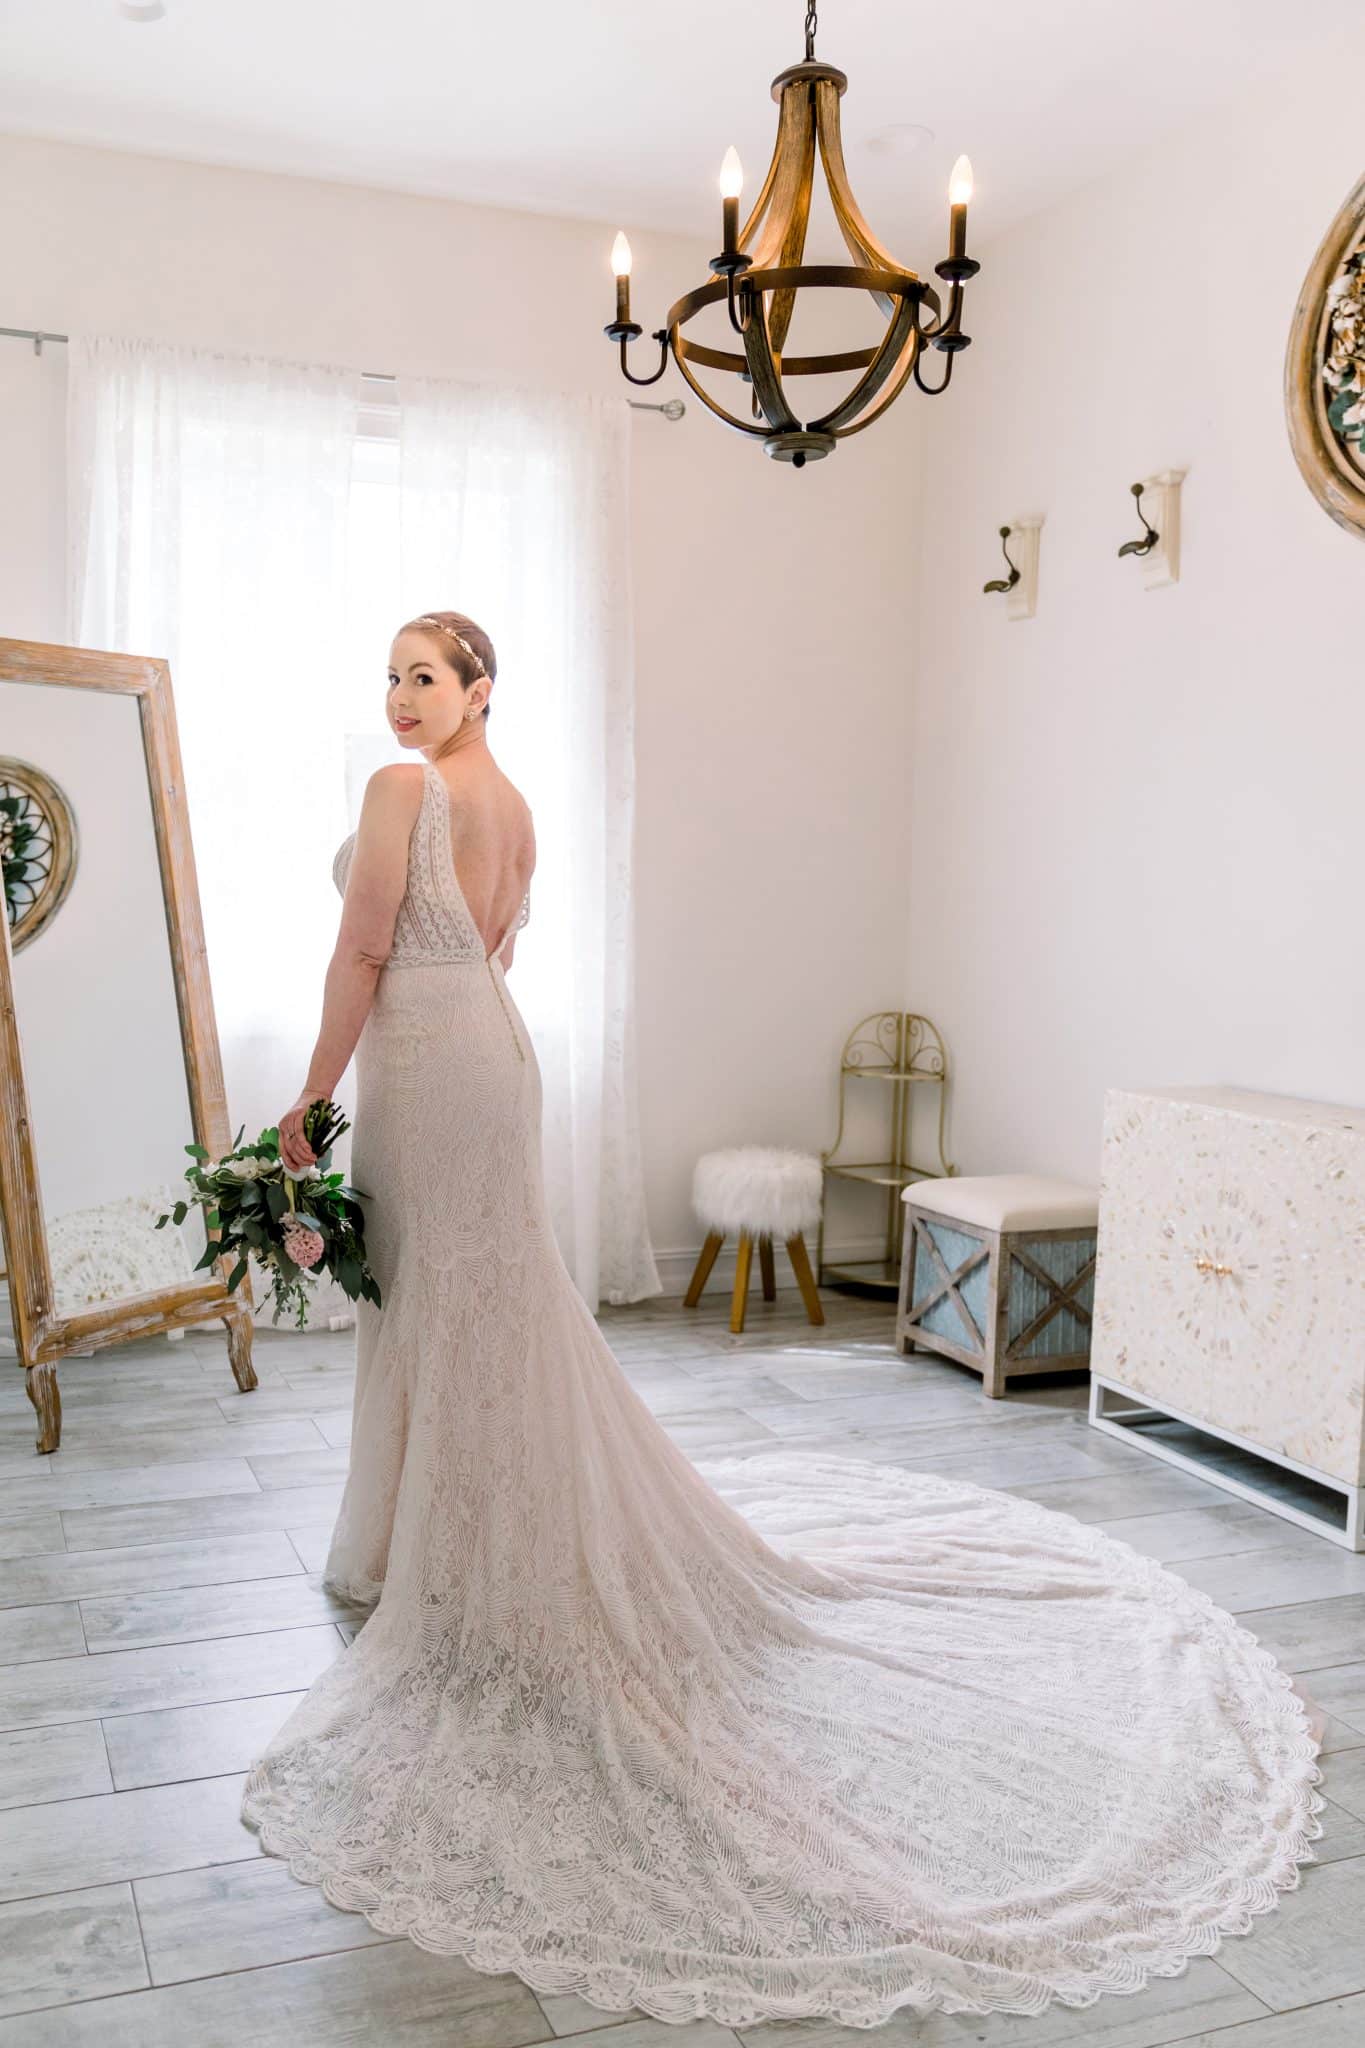 Bride, Amanda, stands in front of mirror at Bending Branch Ranch moments before her wedding vow renewal in her sleeveless, open back, wedding dress by The Bridal Finery.